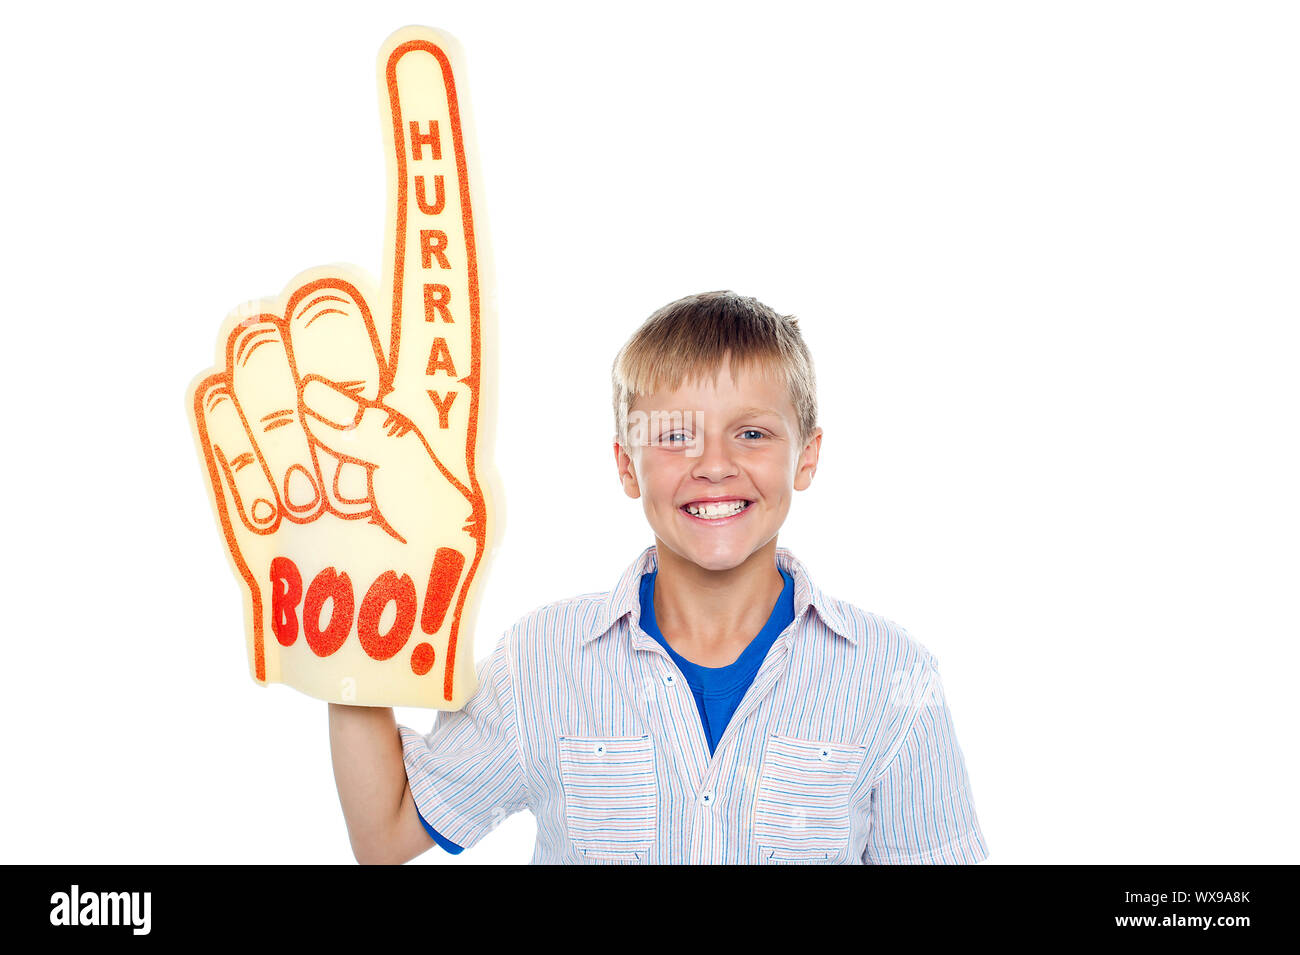 Handsome boy with a hurray boo foam hand pointing skywards on isolated white background Stock Photo